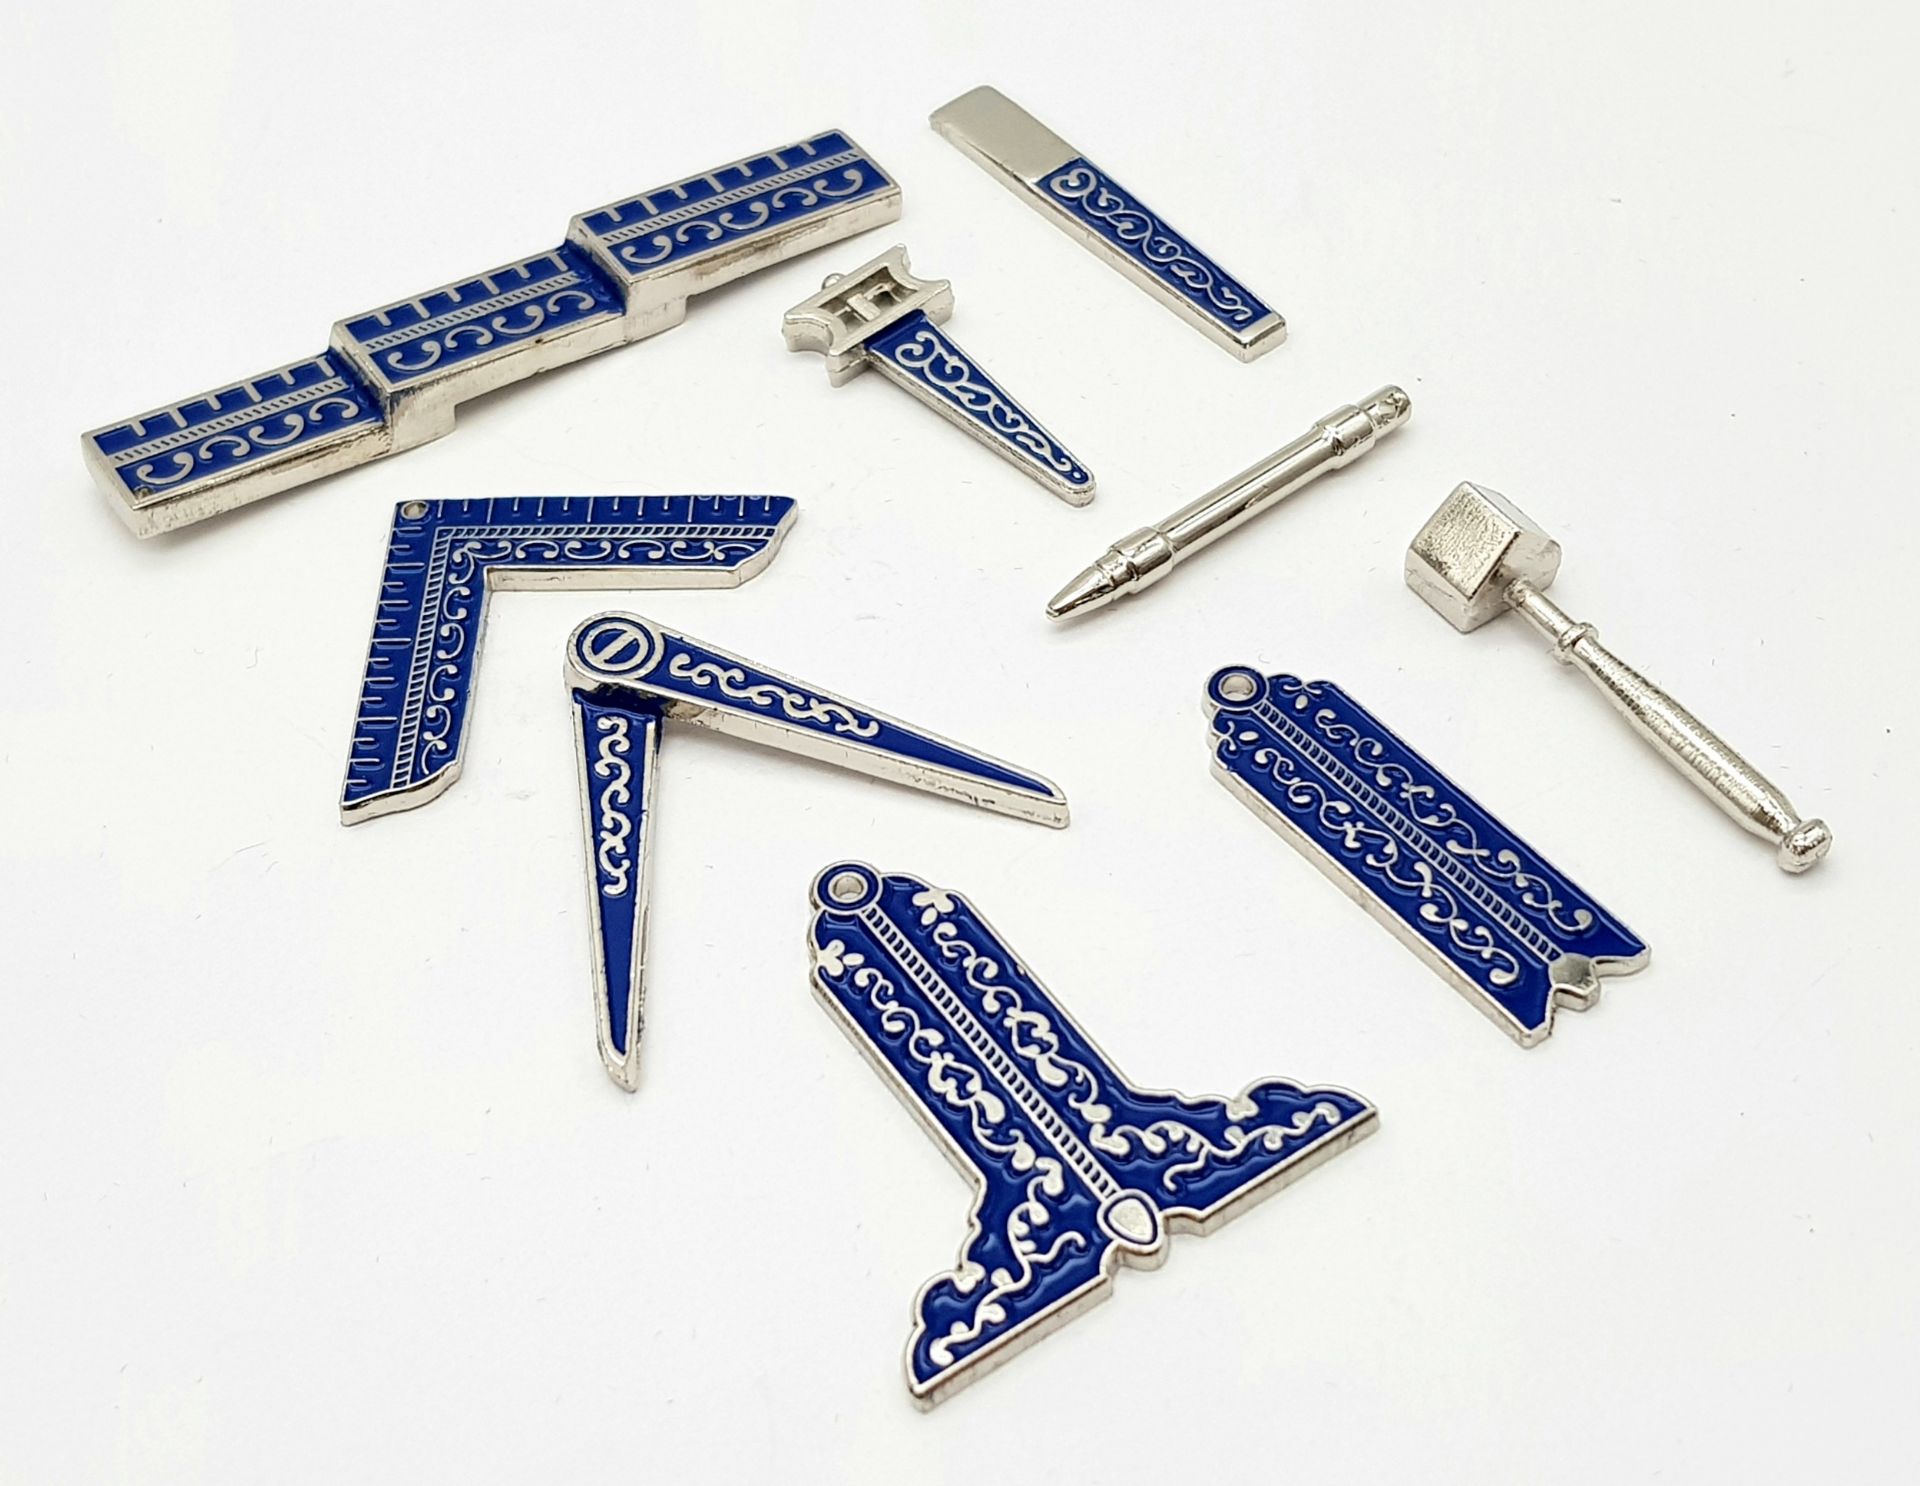 A miniature set of Masonic Working Tools for all Three Degrees. Perfect for training and rehearsals,